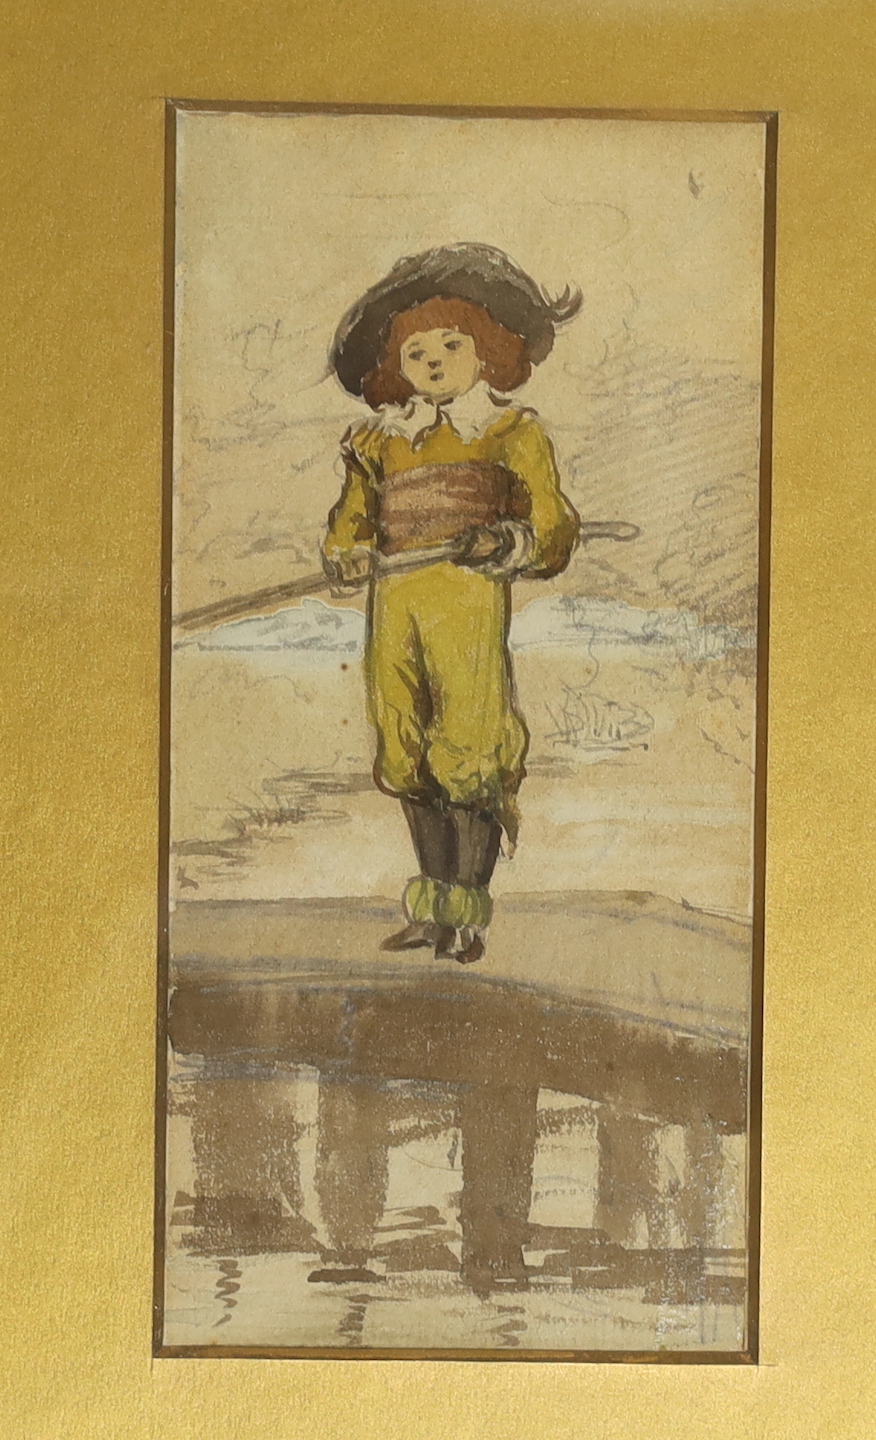 Charles Trevor Garland (1851-1906), two watercolours, dog & cat and boy angler, one signed and dated Jan '79, largest 12 x 17cm